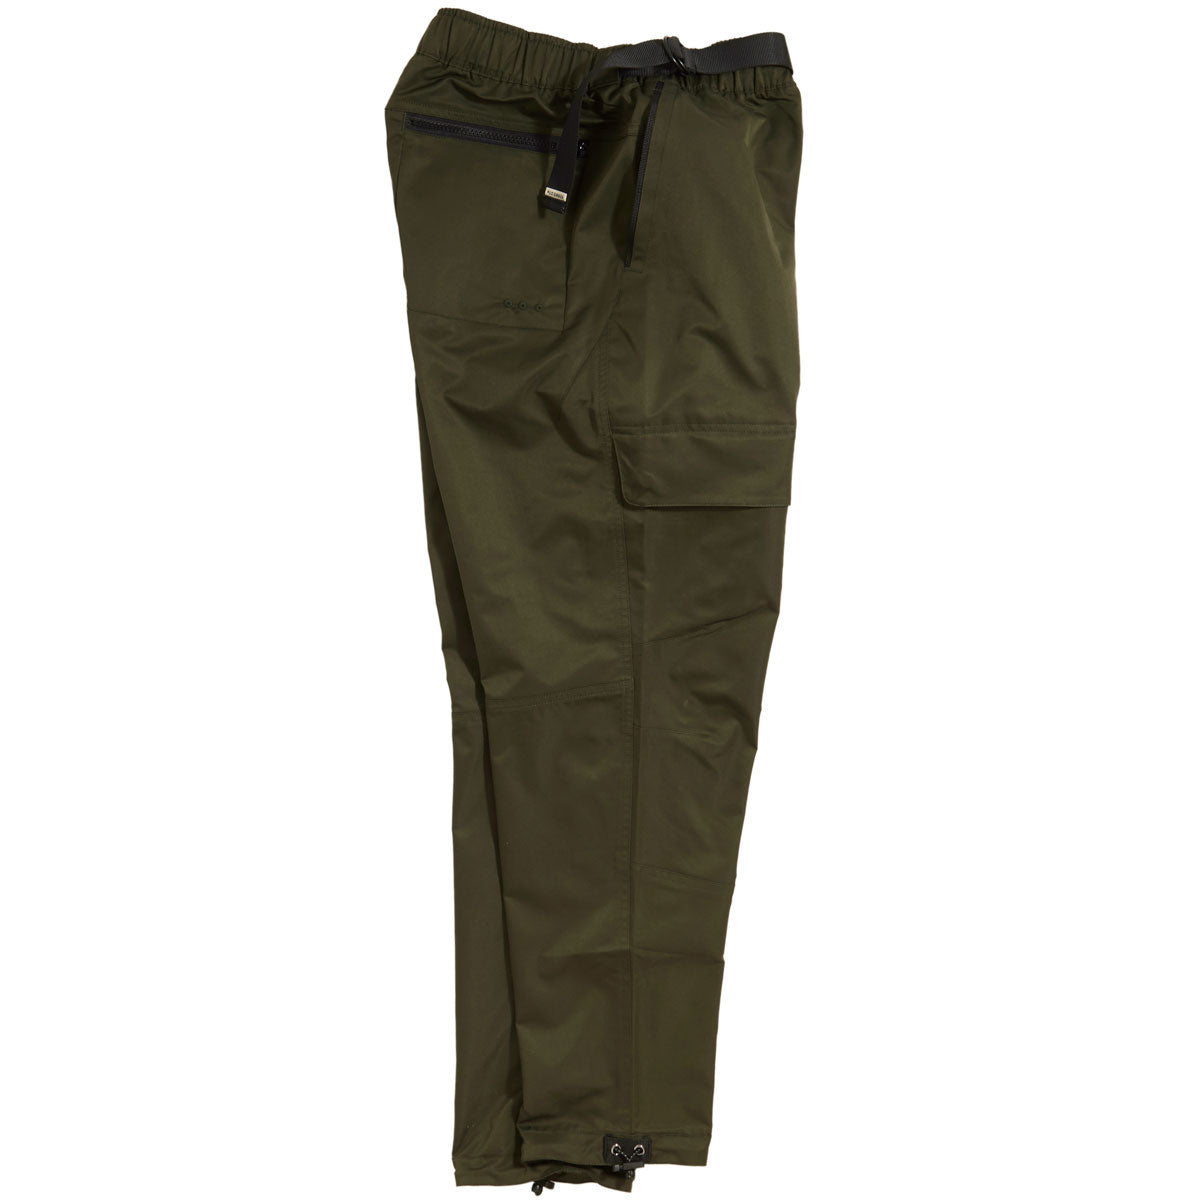 Kennedy The Flight Cargo Pants - Fatigue image 3